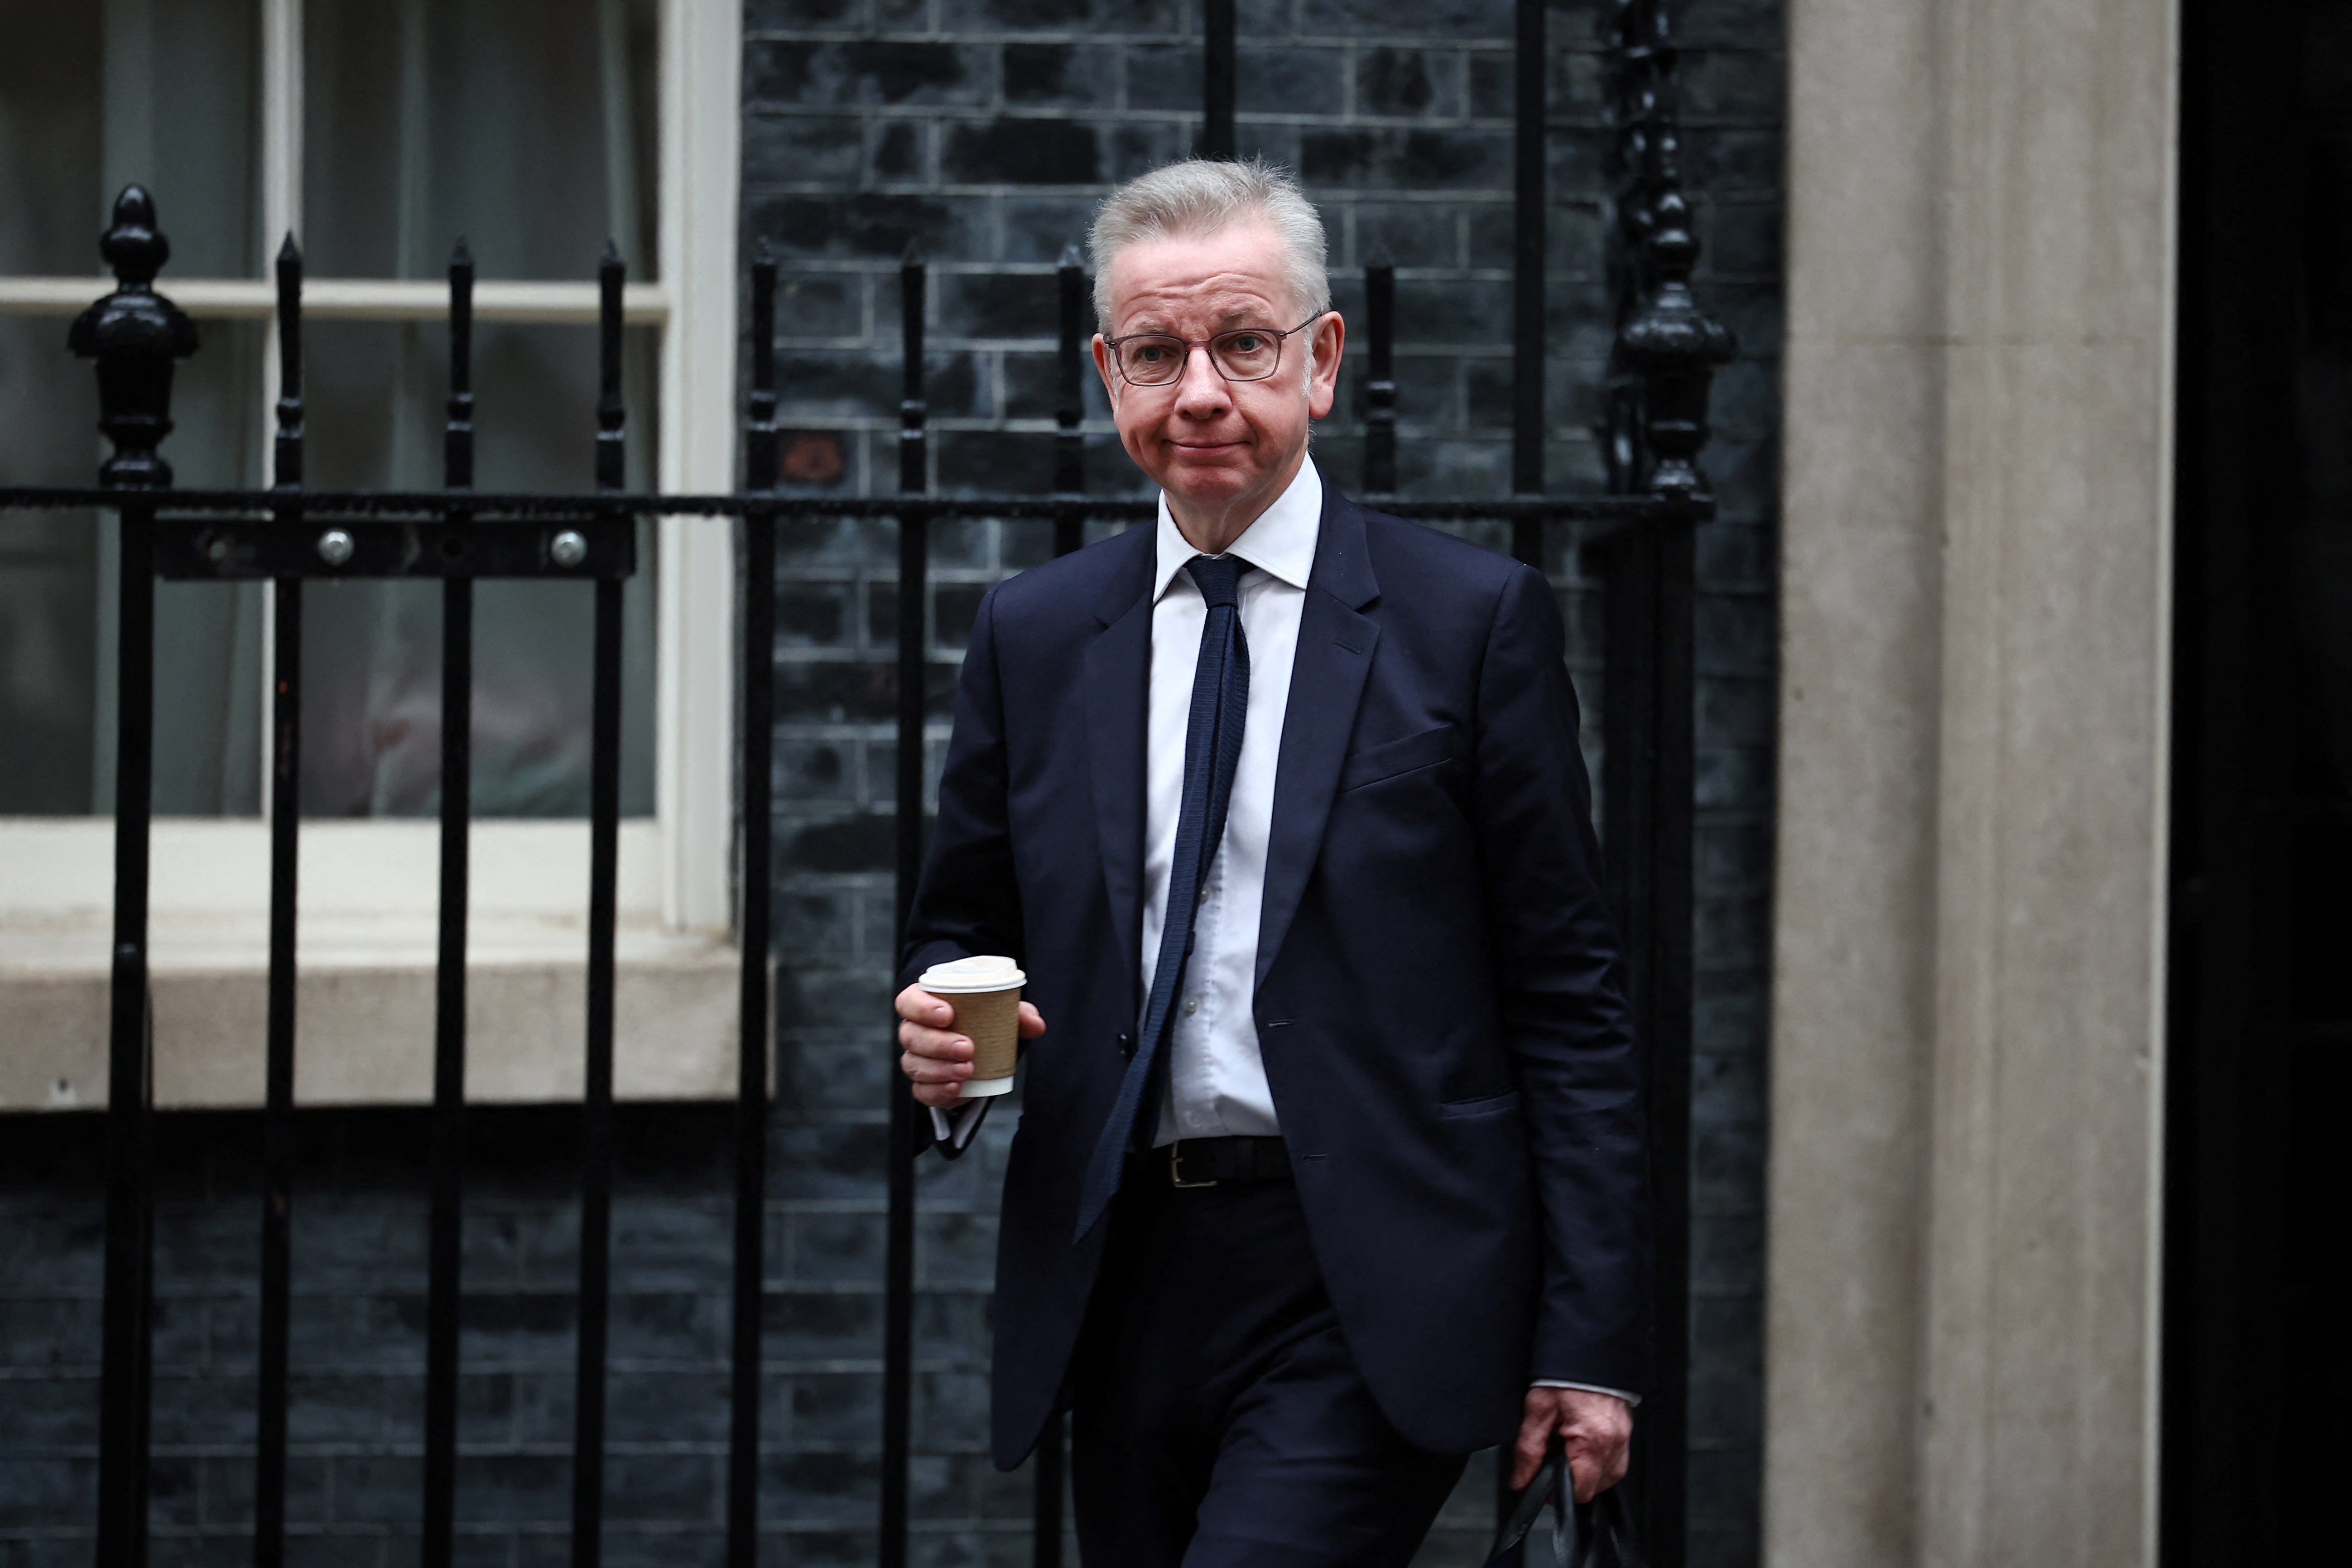 Michael Gove had appeared at the head of a Lib Dem hit list of top Tory targets they believe they can unseat